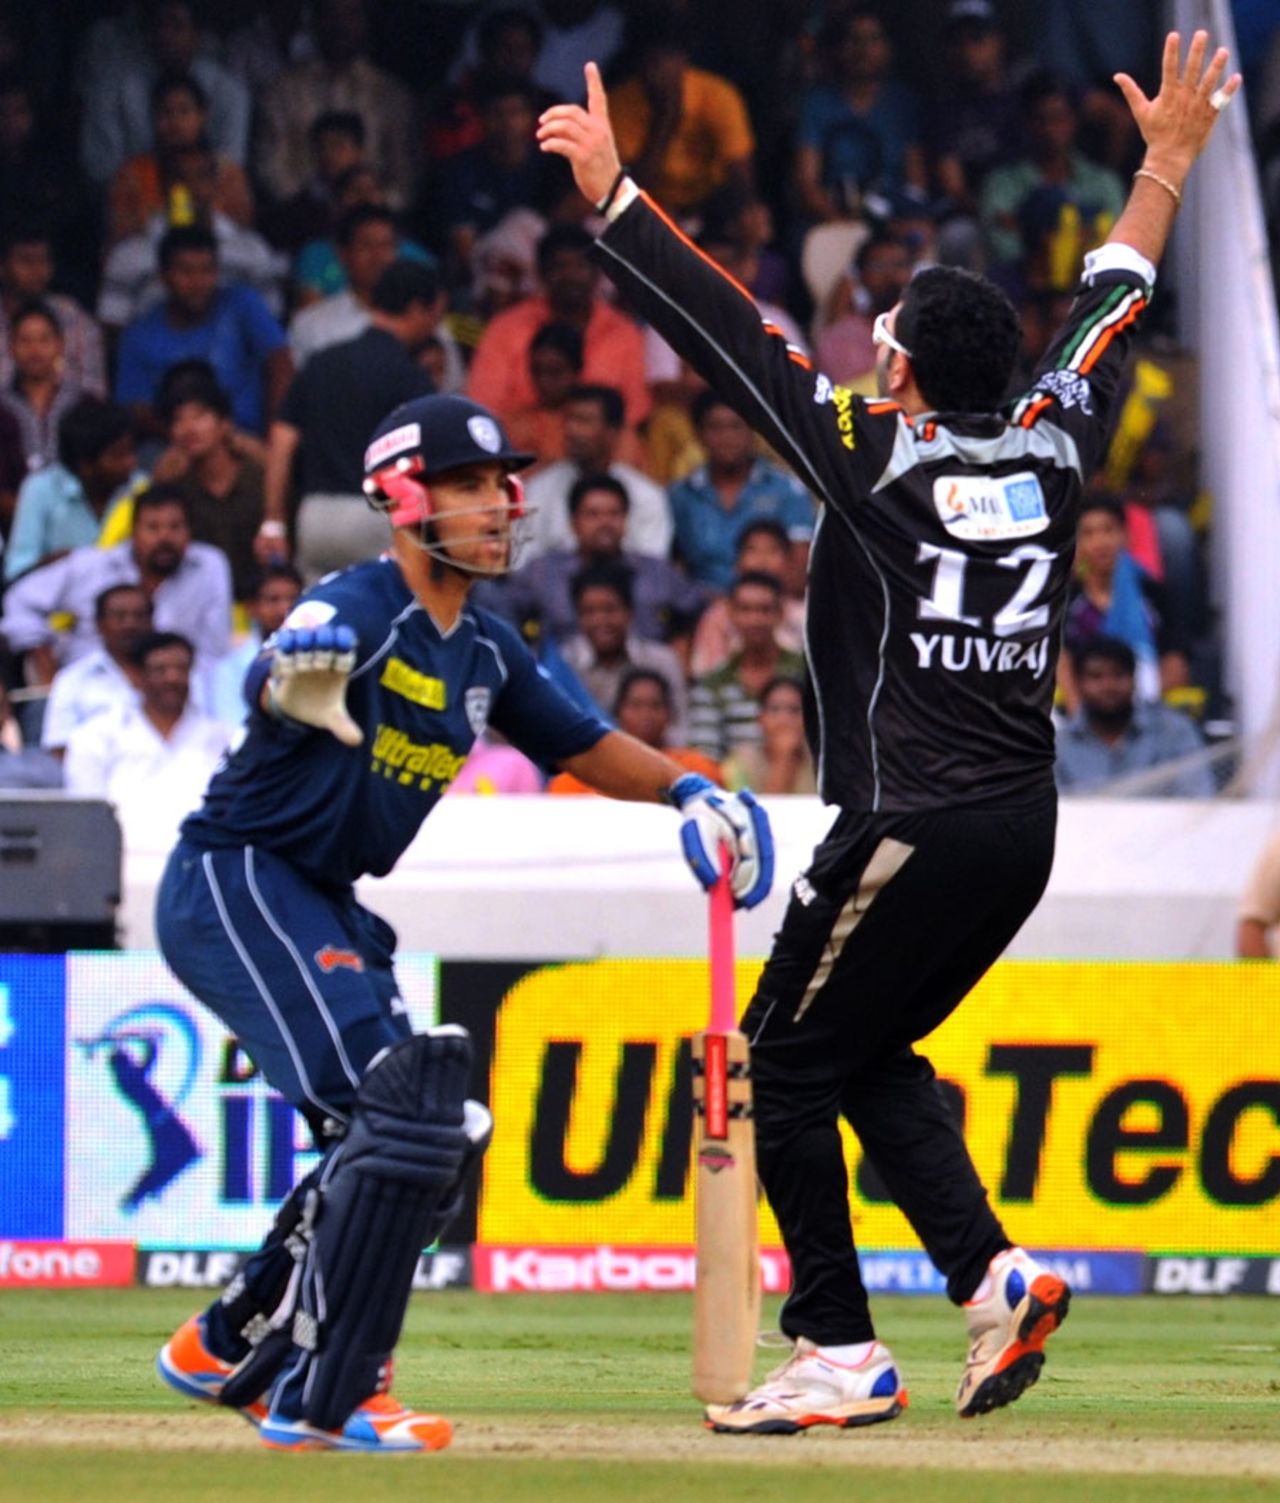 JP Duminy watches as Yuvraj Singh celebrates the fall of a wicket, Deccan Chargers v Pune Warriors, IPL 2011, Hyderabad, April 10, 2011